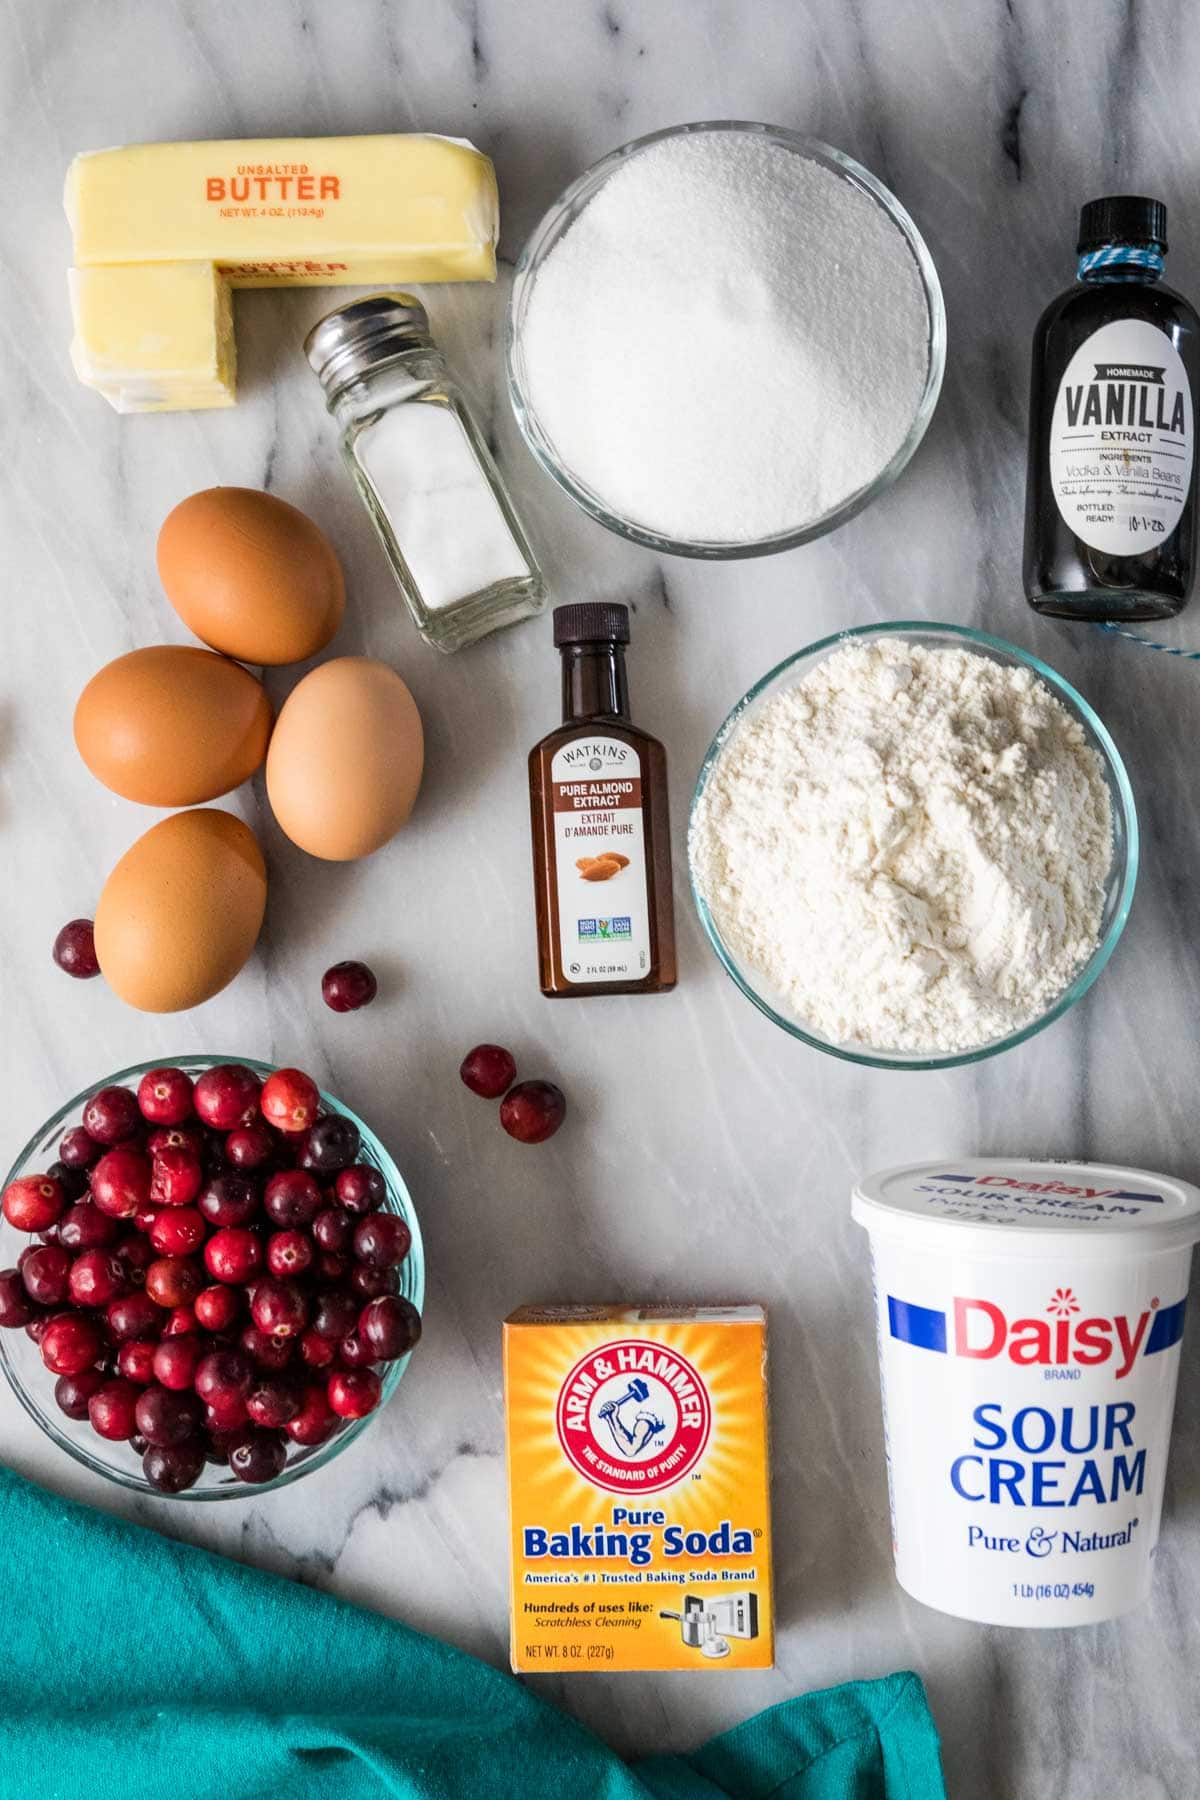 Overhead view of ingredients including cranberries, sour cream, eggs, almond extract, and more.